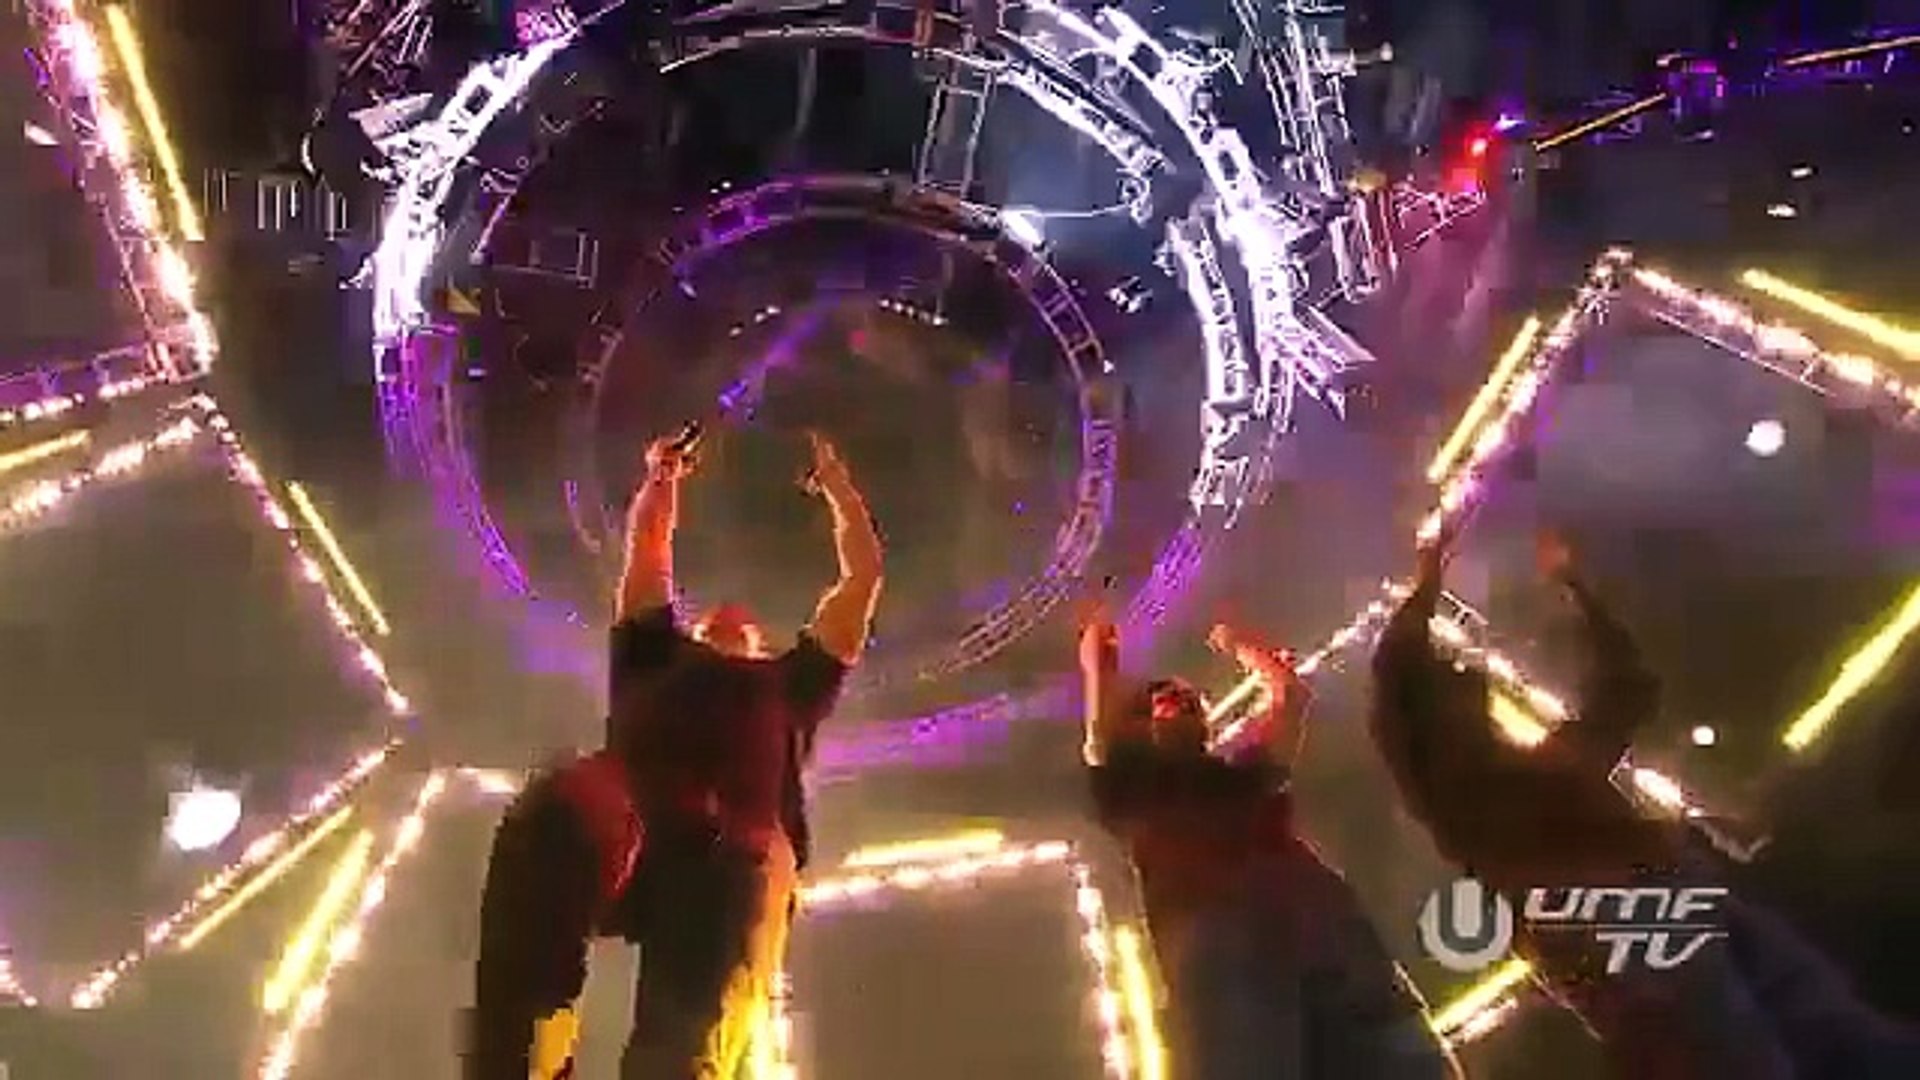 Skrillex and Diplo Perform Where Are U Now Live with Justin Bieber at the  Grammys - By The Wavs